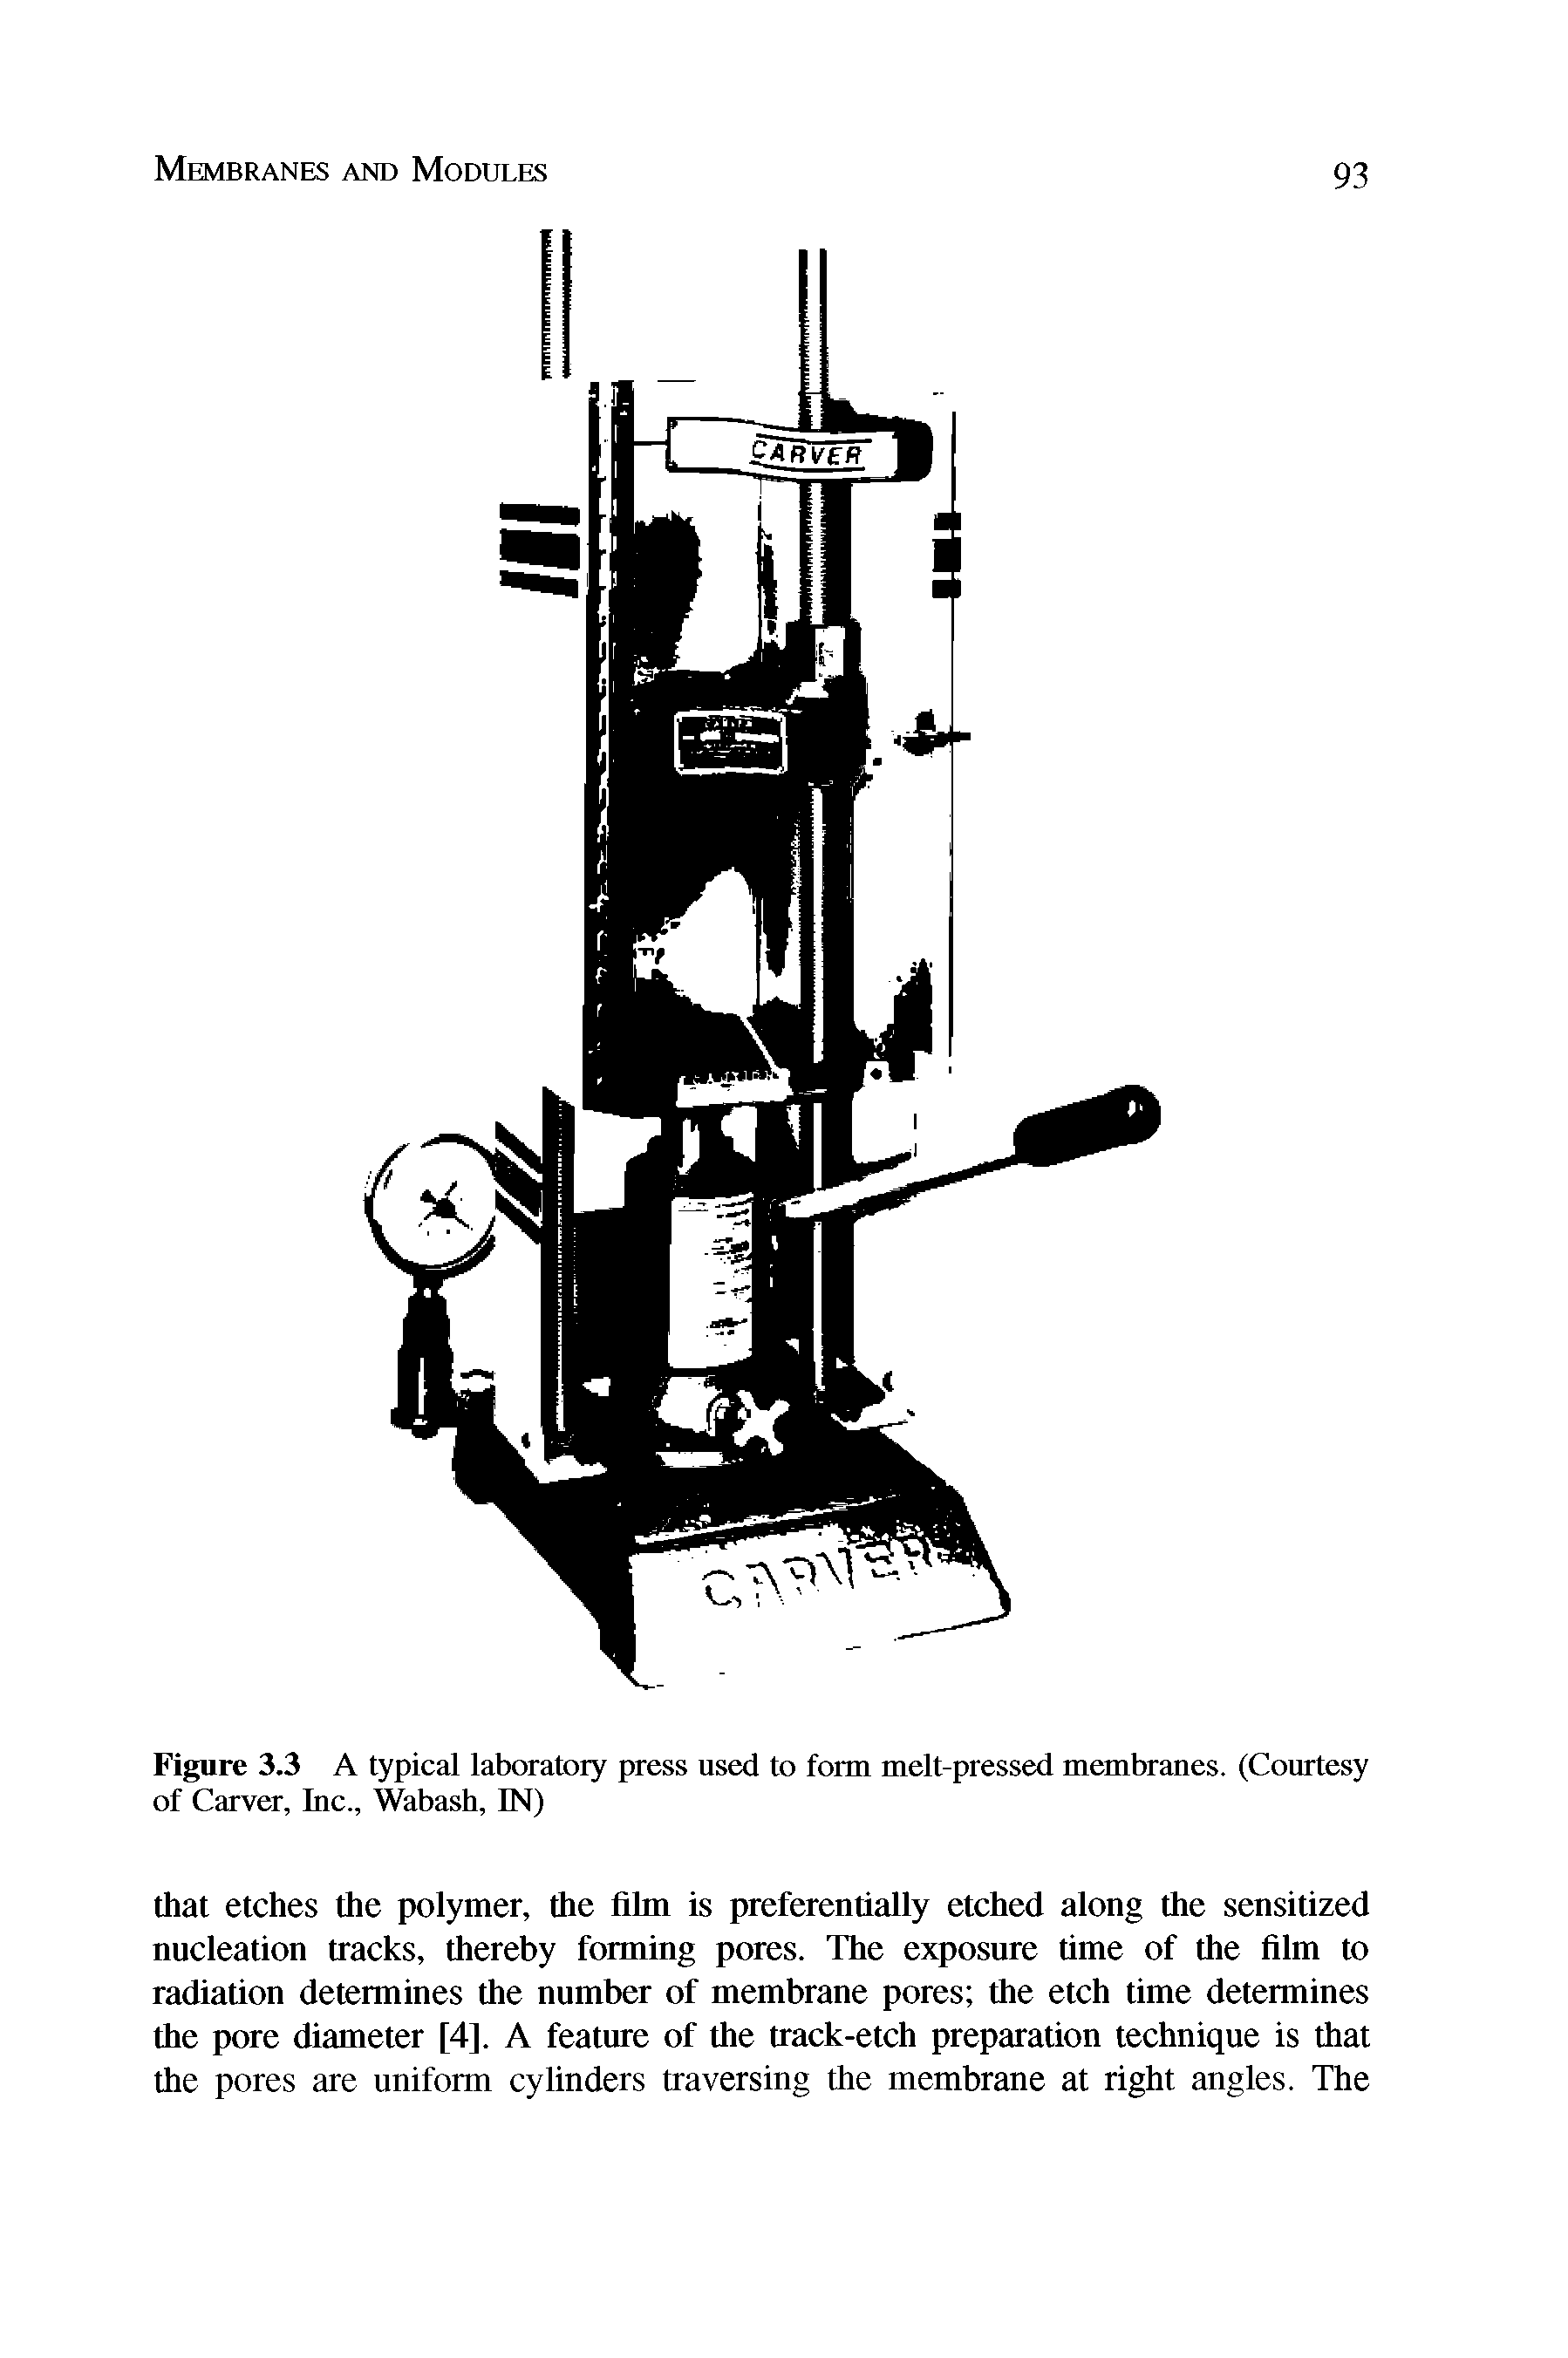 Figure 3.3 A typical laboratory press used to form melt-pressed membranes. (Courtesy of Carver, Inc., Wabash, IN)...